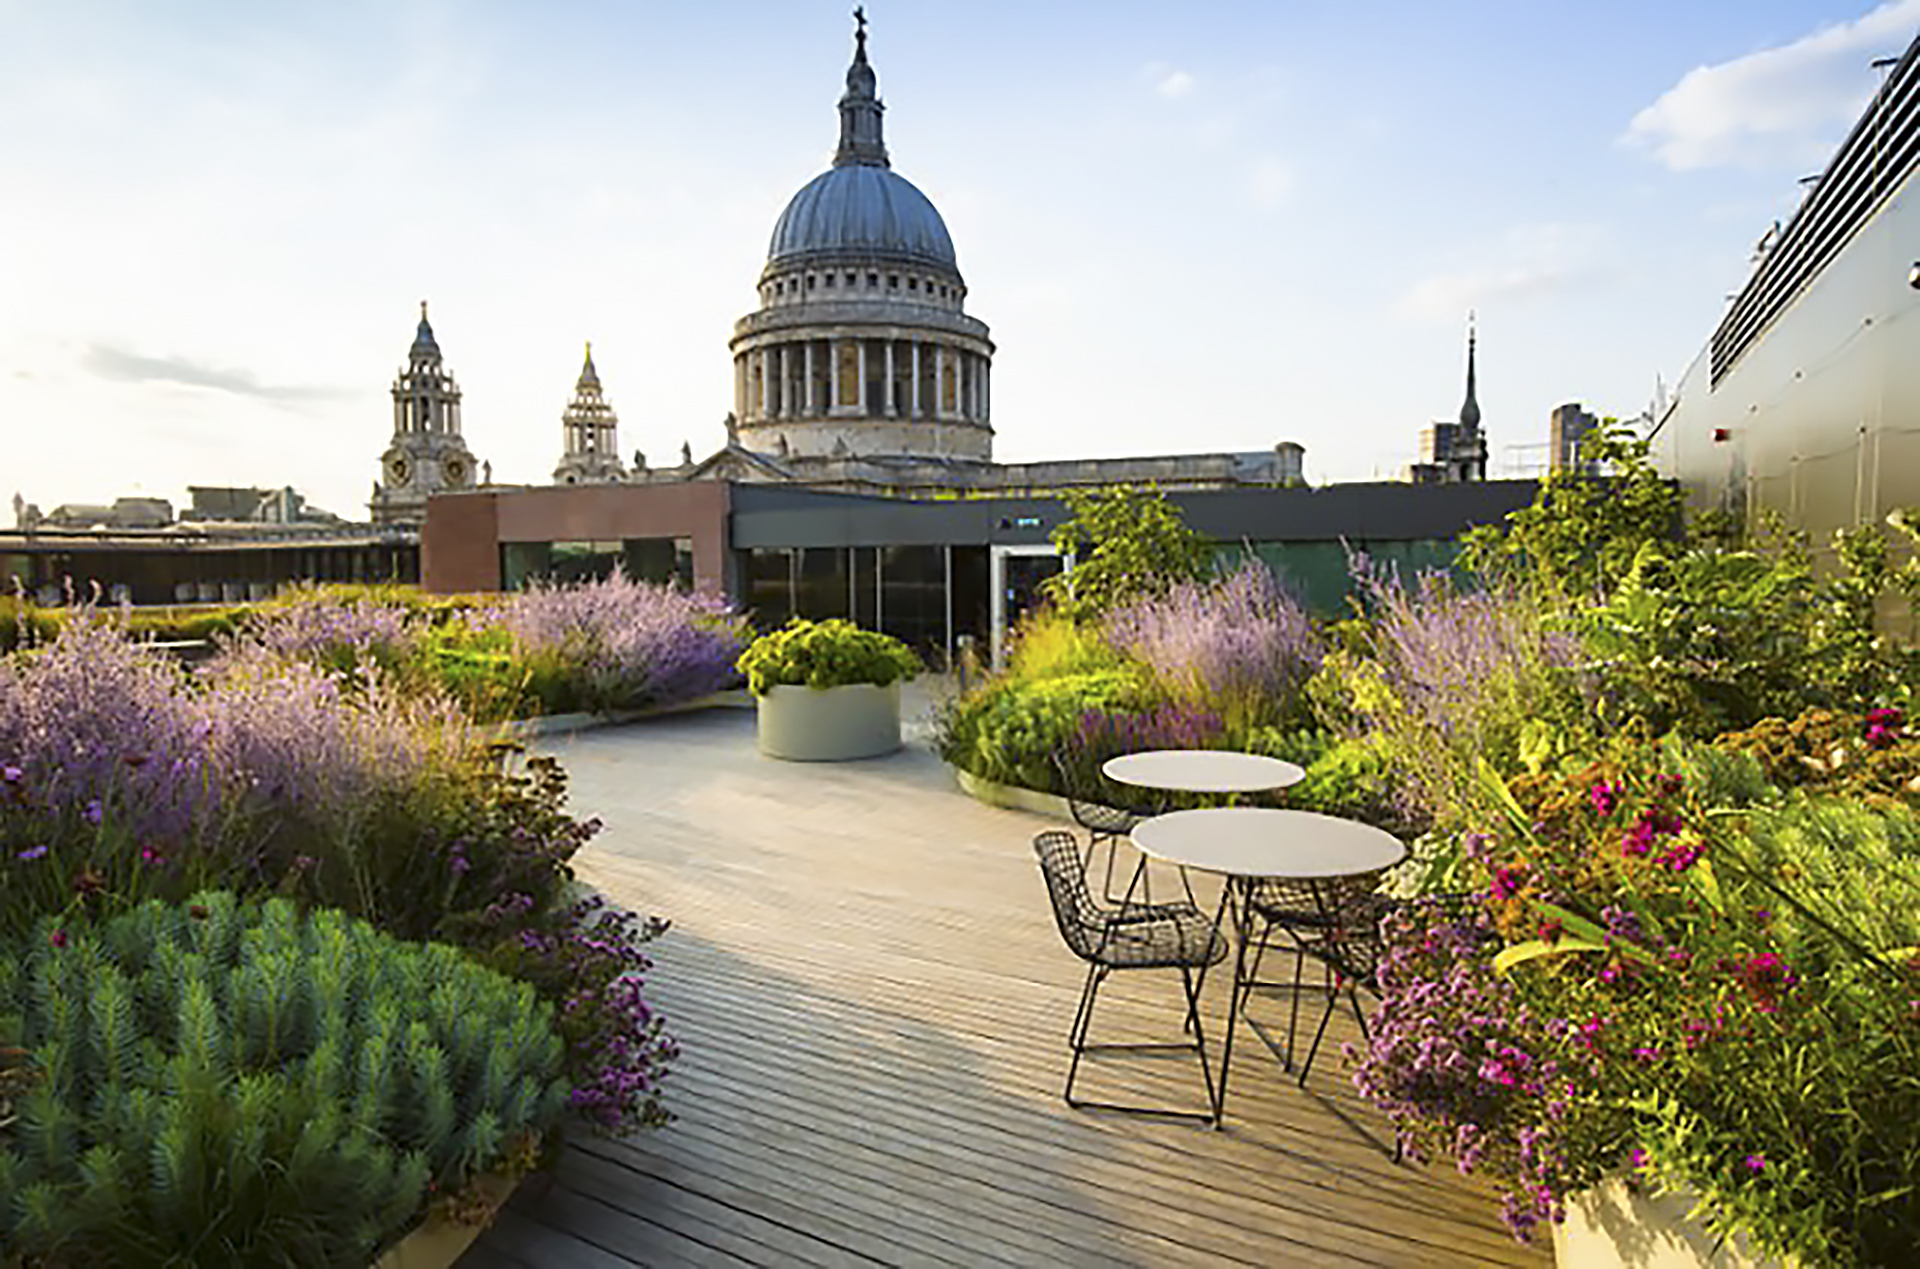 4 Cannon Street, London - Extensive landscaped roof terrace encourages biodiversity and improves occupant health and wellbeing